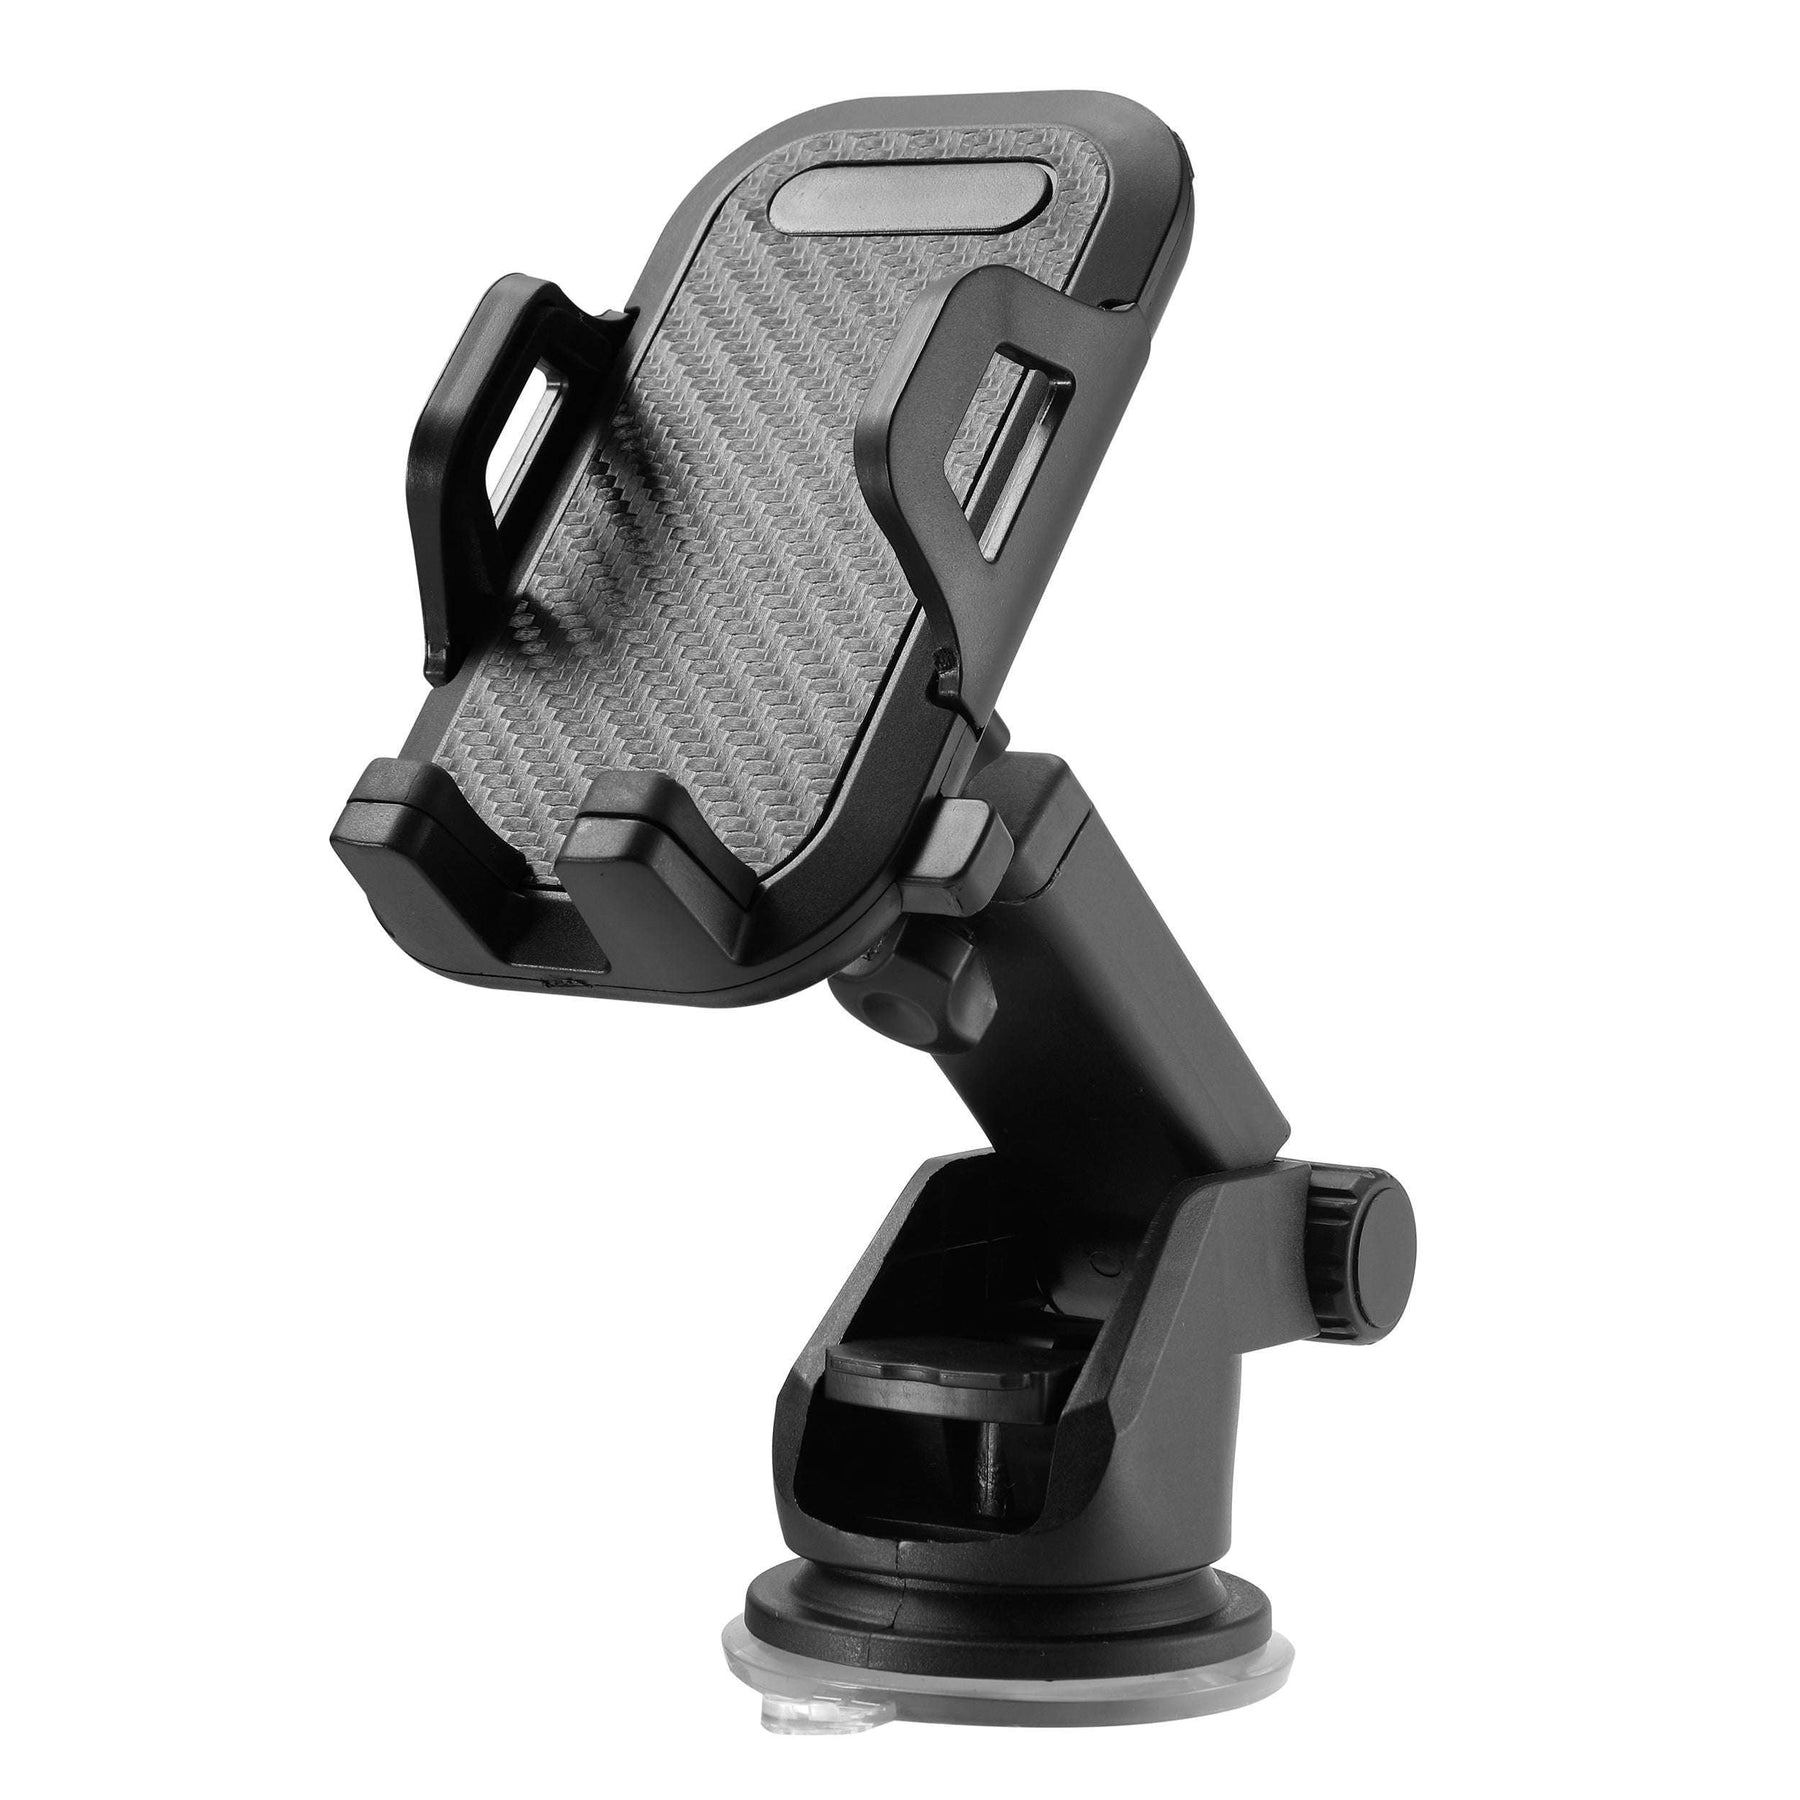 Car Phone Mount, Phone Holder for Car, Long Arm Suction Cup Phone Holder,  Strong Universal Hands-Free Suction Cell Phone Holder, Car Phone Holder